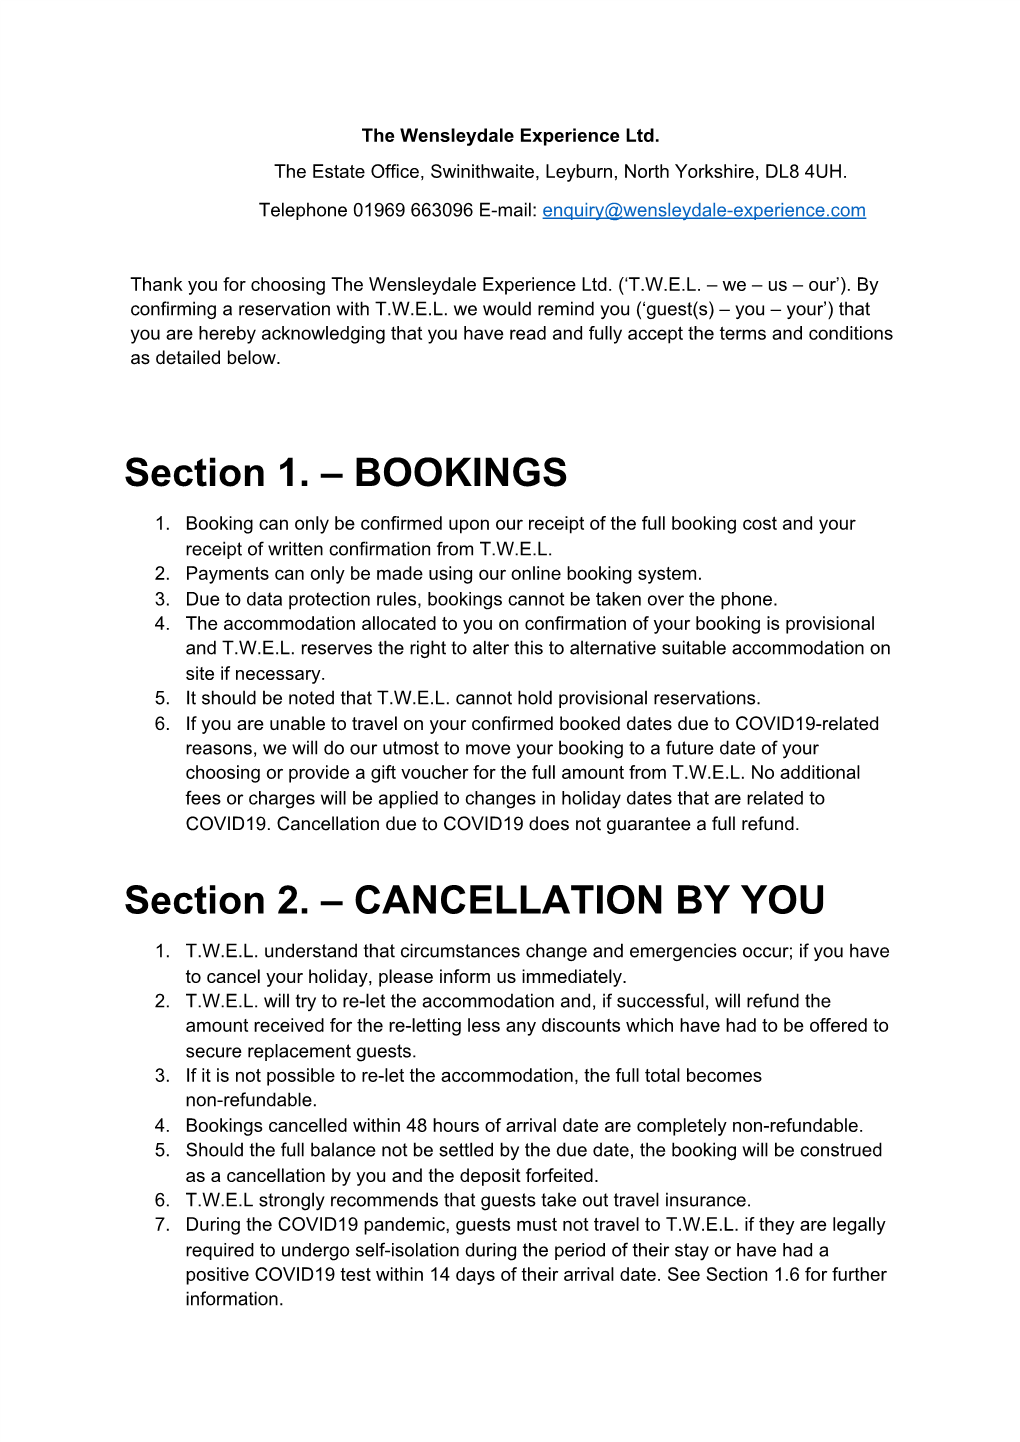 BOOKINGS Section 2. – CANCELLATION BY